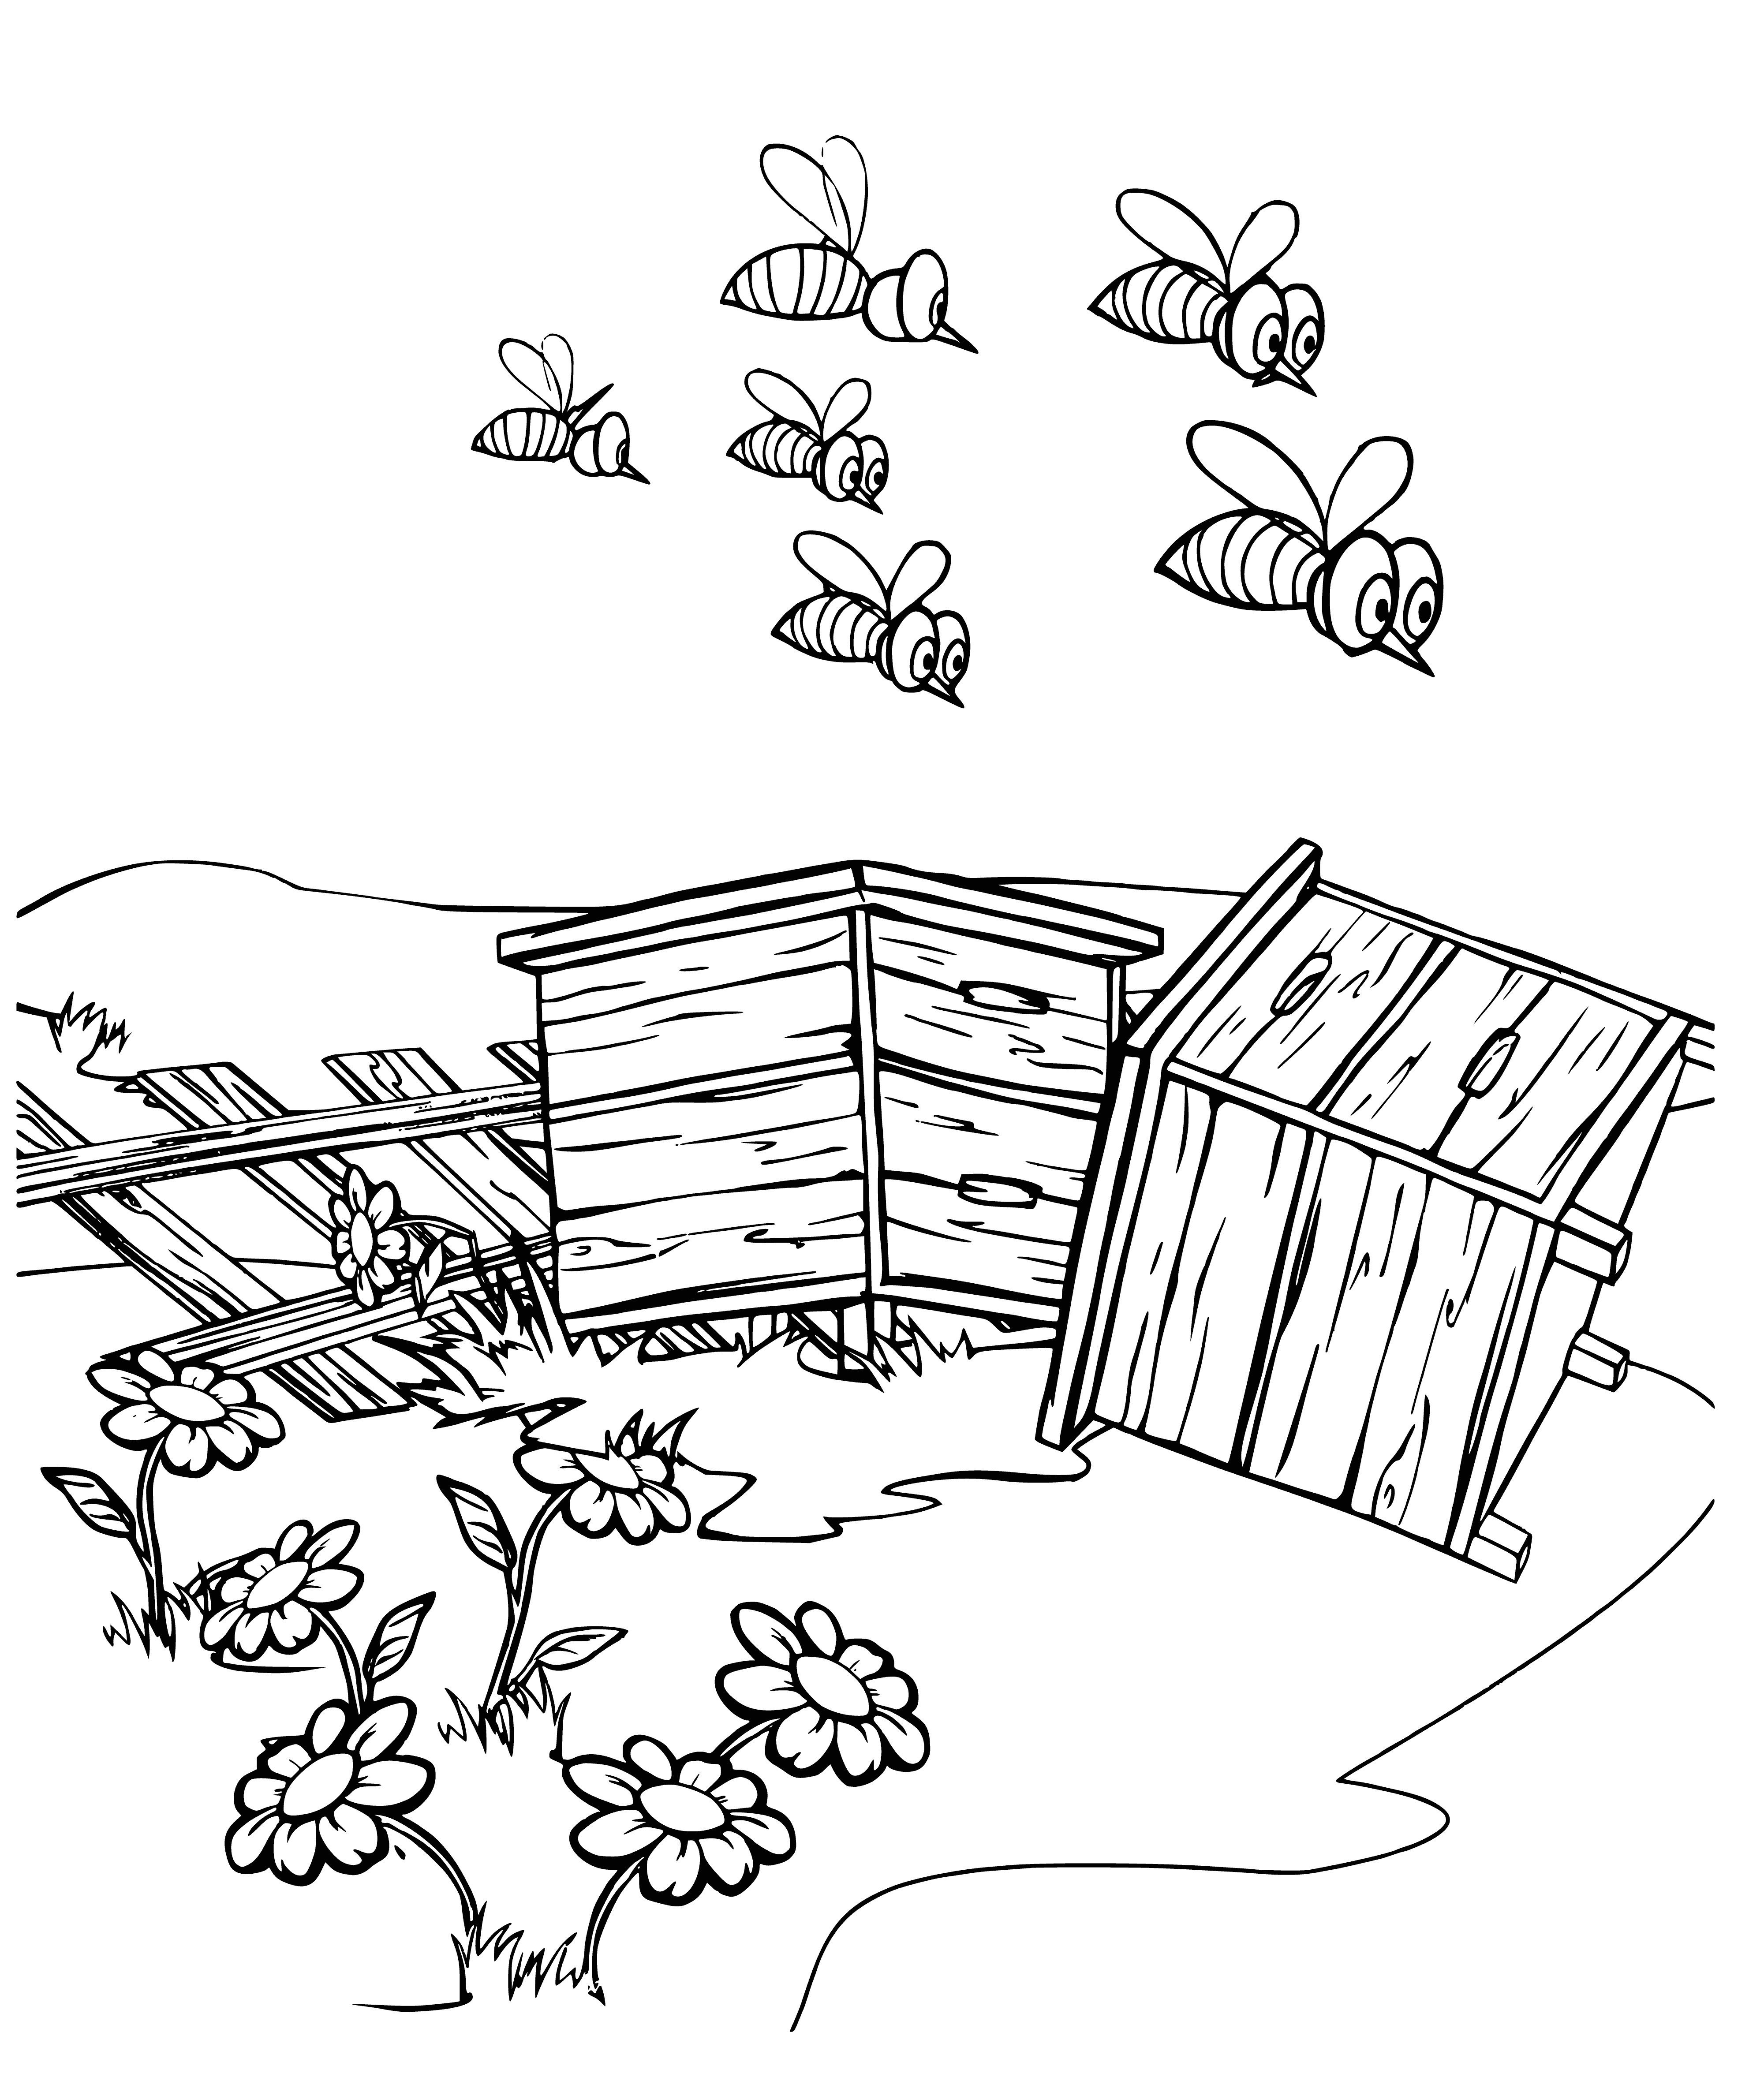 coloring page: Masha faces a swarm of angry bees ready to attack.